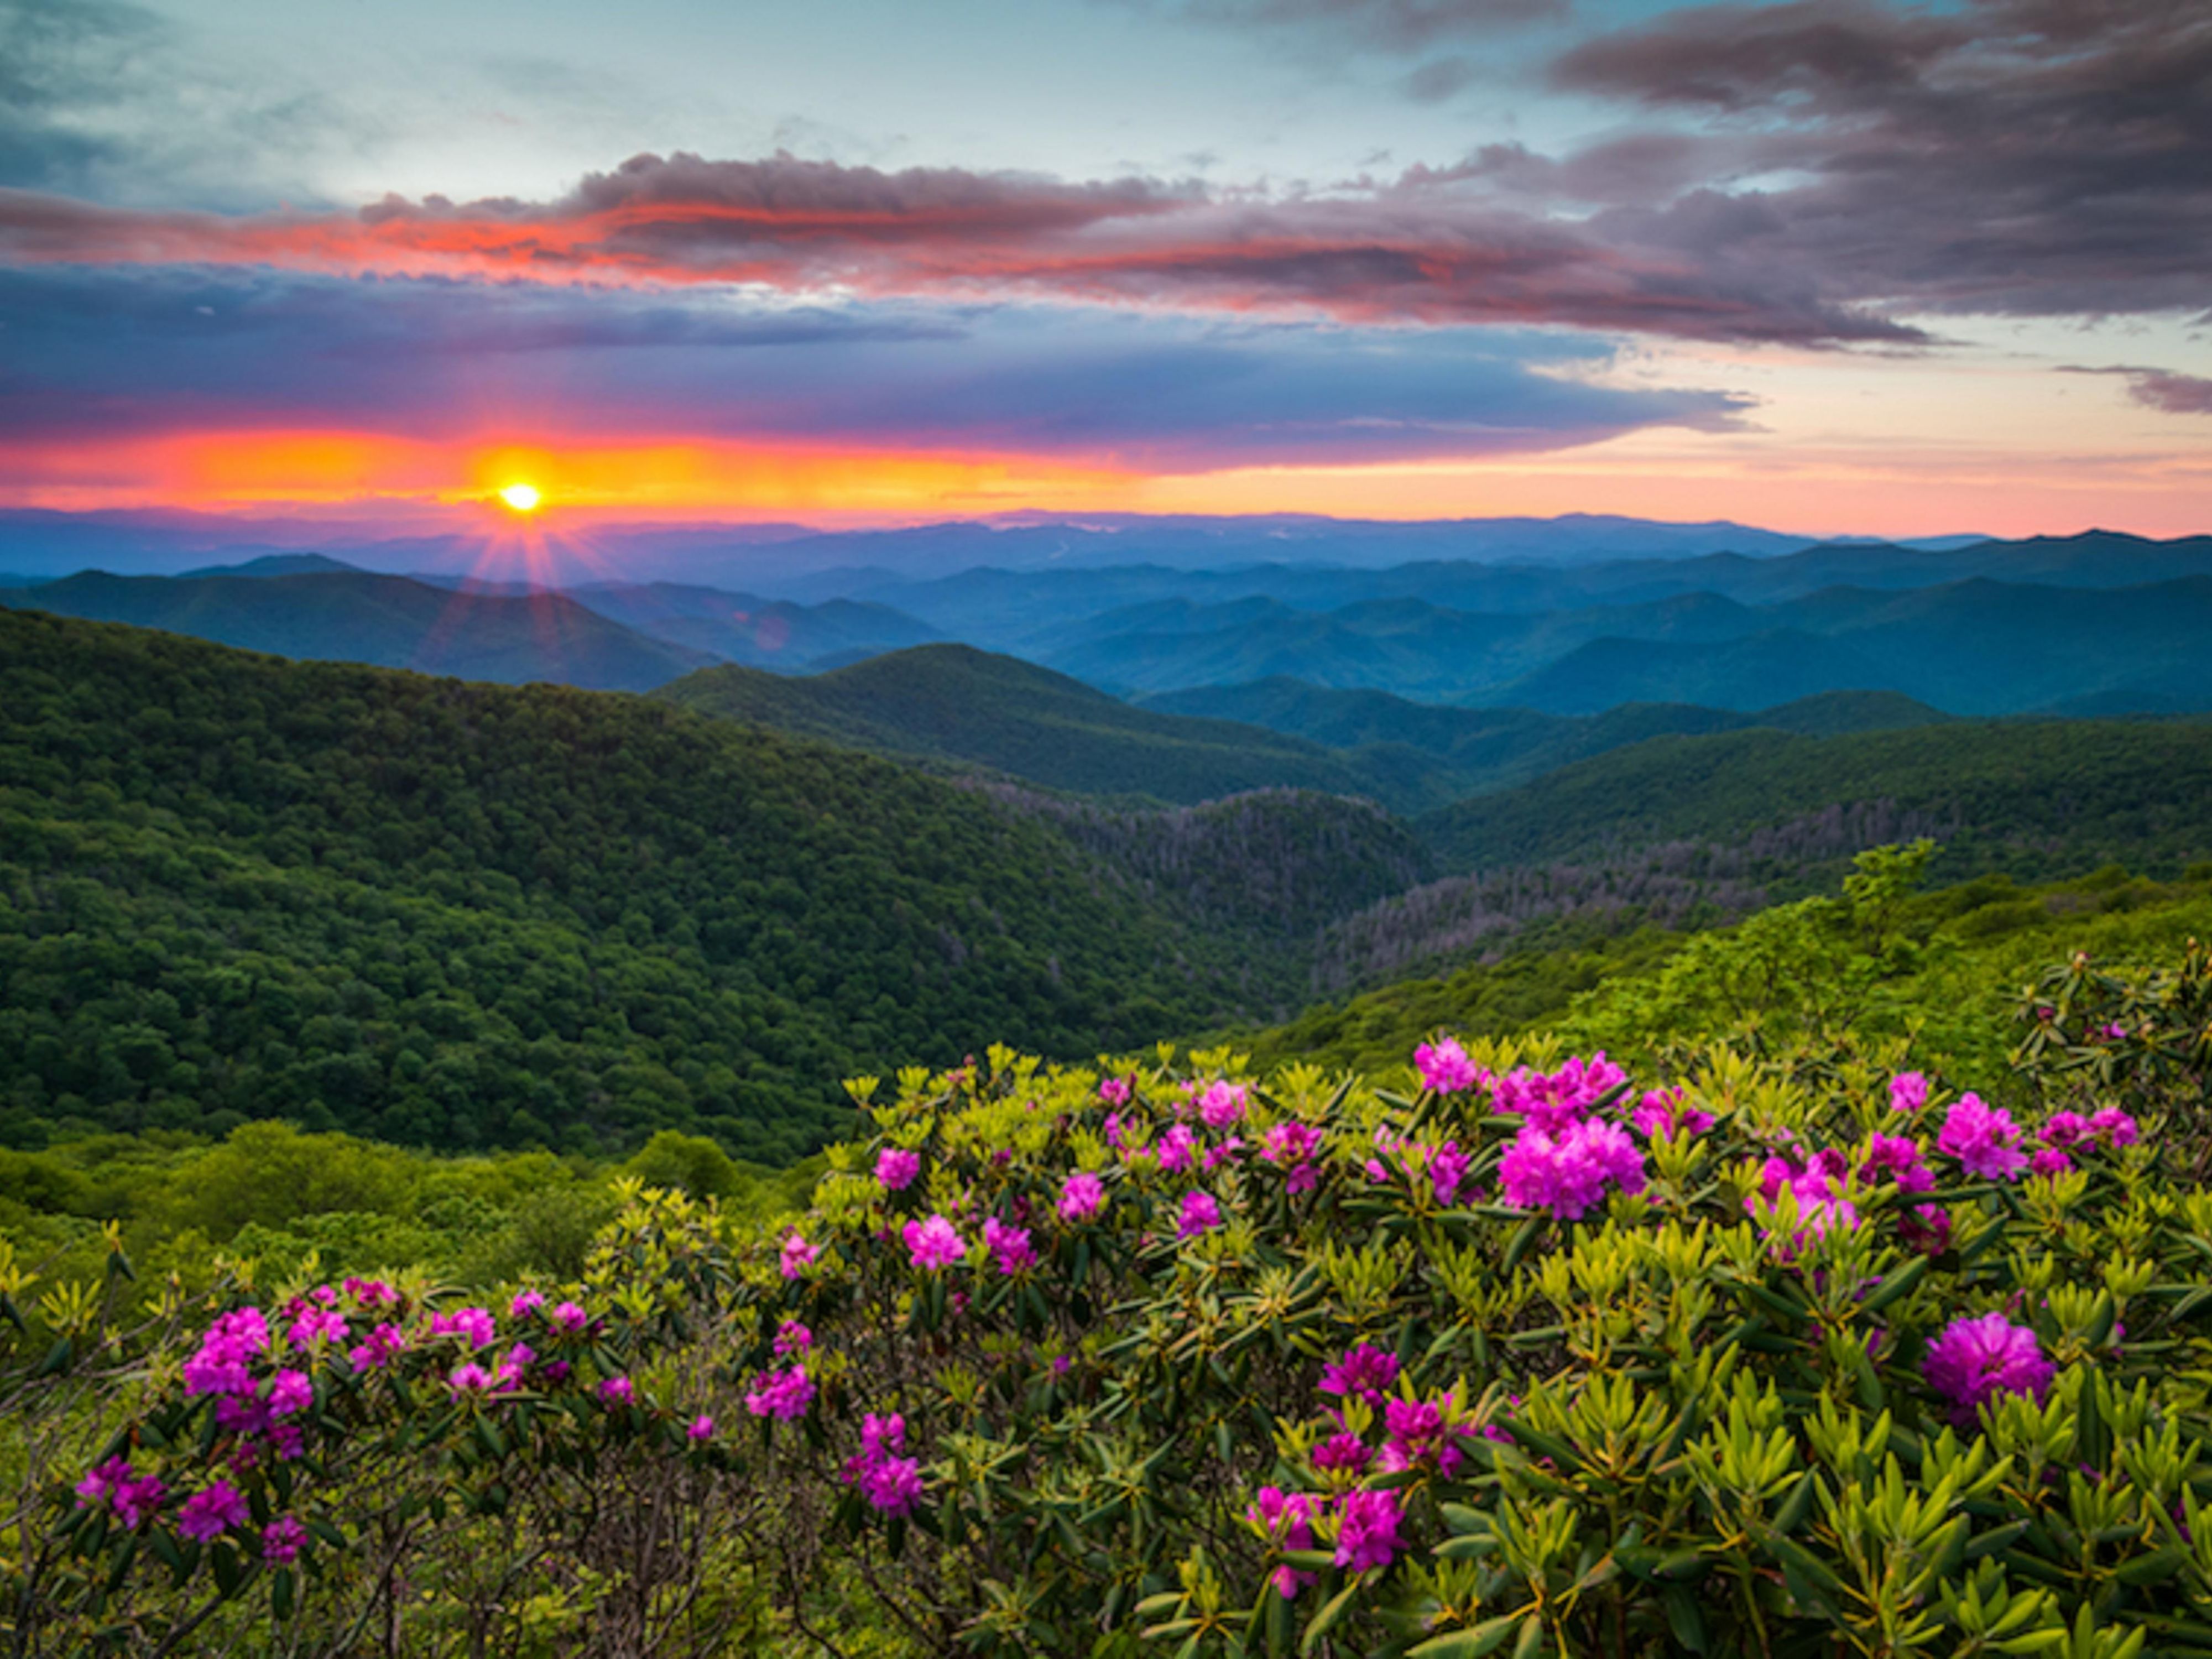 Get your explorer shoes on and relax in nature at the many stops and scenic overviews of the Blue Ridge Parkway! Drive through the mountain tunnels into a world of beautiful landscapes far and wide!  